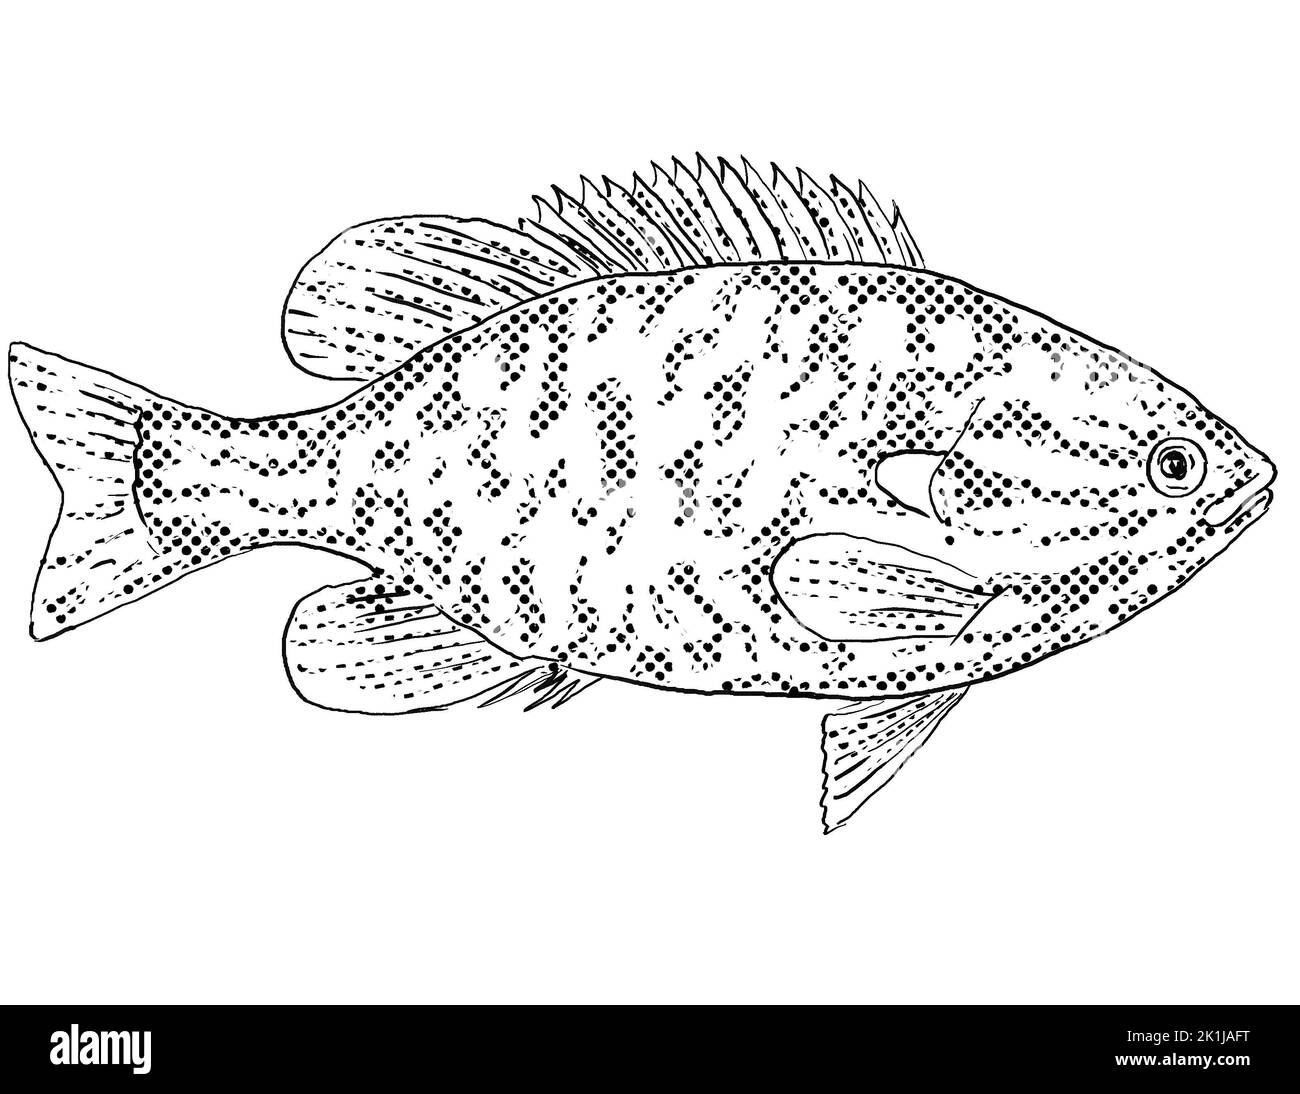 Cartoon style line drawing of a northern sunfish or Lepomis peltastes a freshwater fish endemic to North America with halftone dots shading on isolate Stock Photo